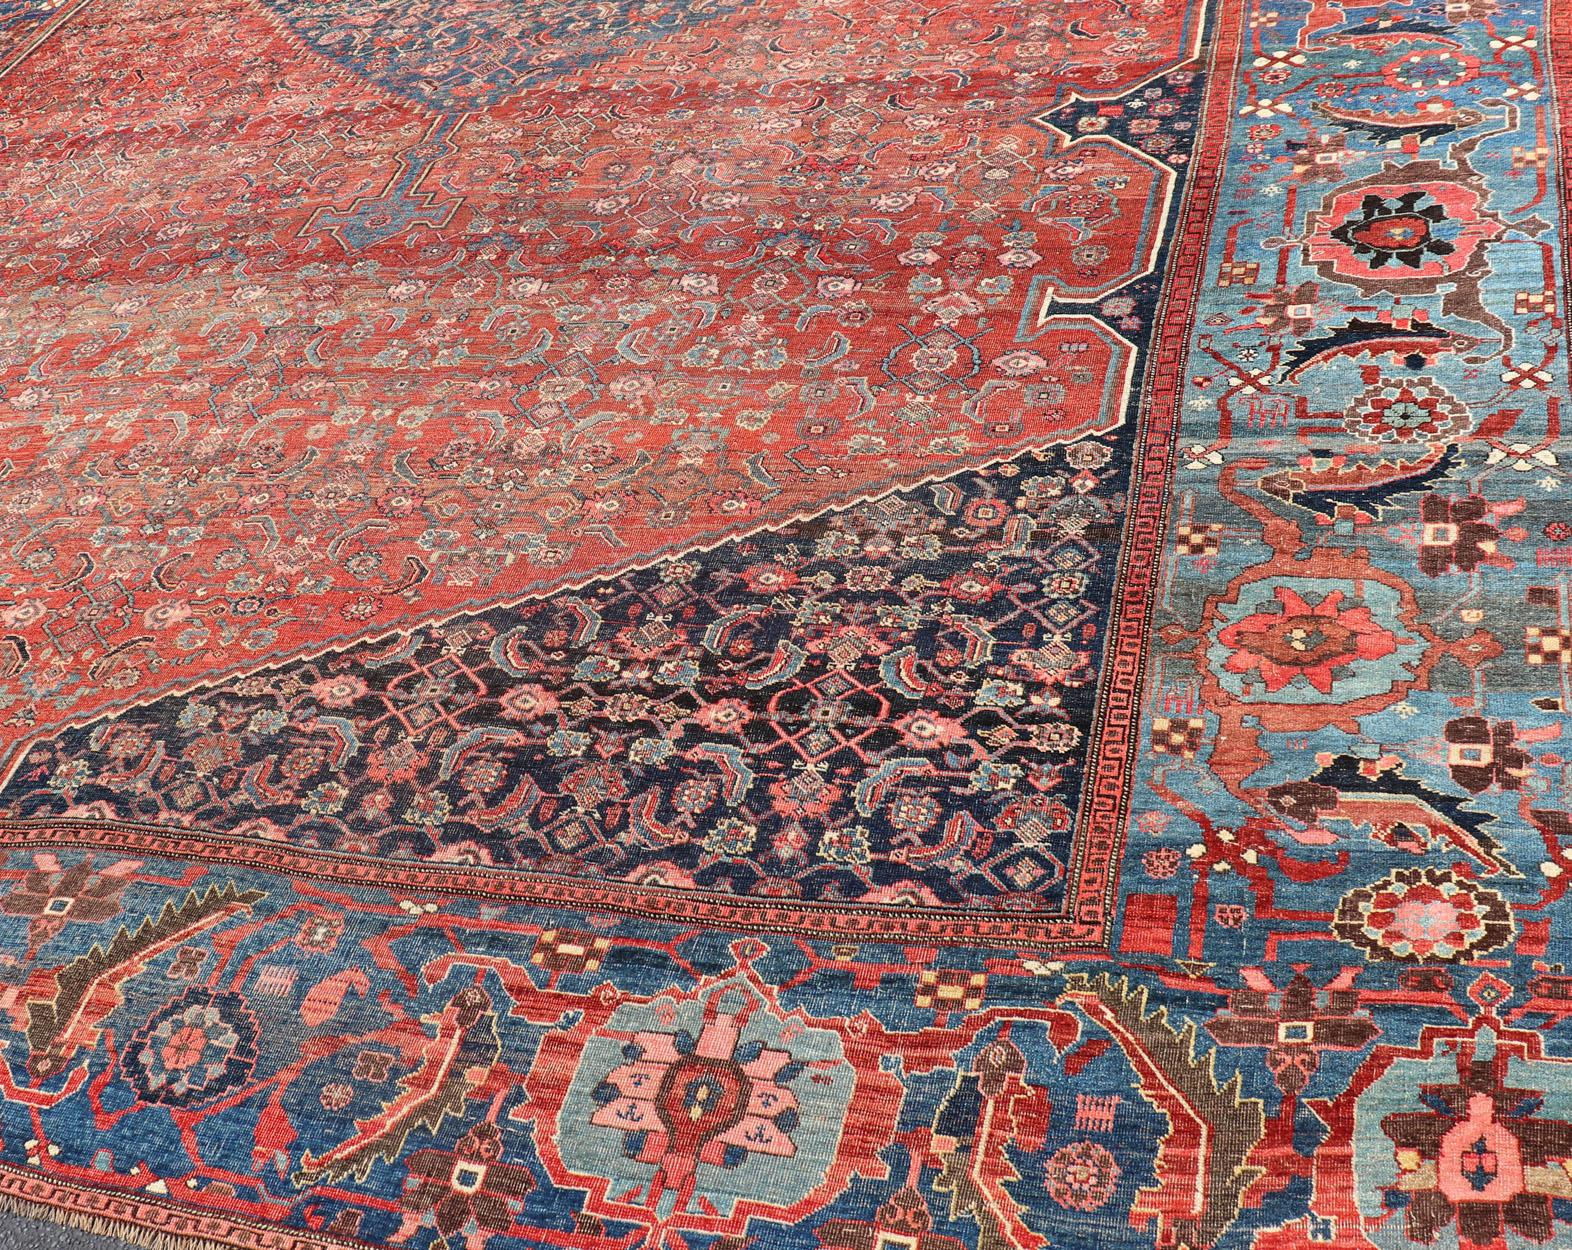 Very Large Antique Persian Bidjar Rug in Multi Shades of Blue, Tera-Cotta & Red For Sale 7